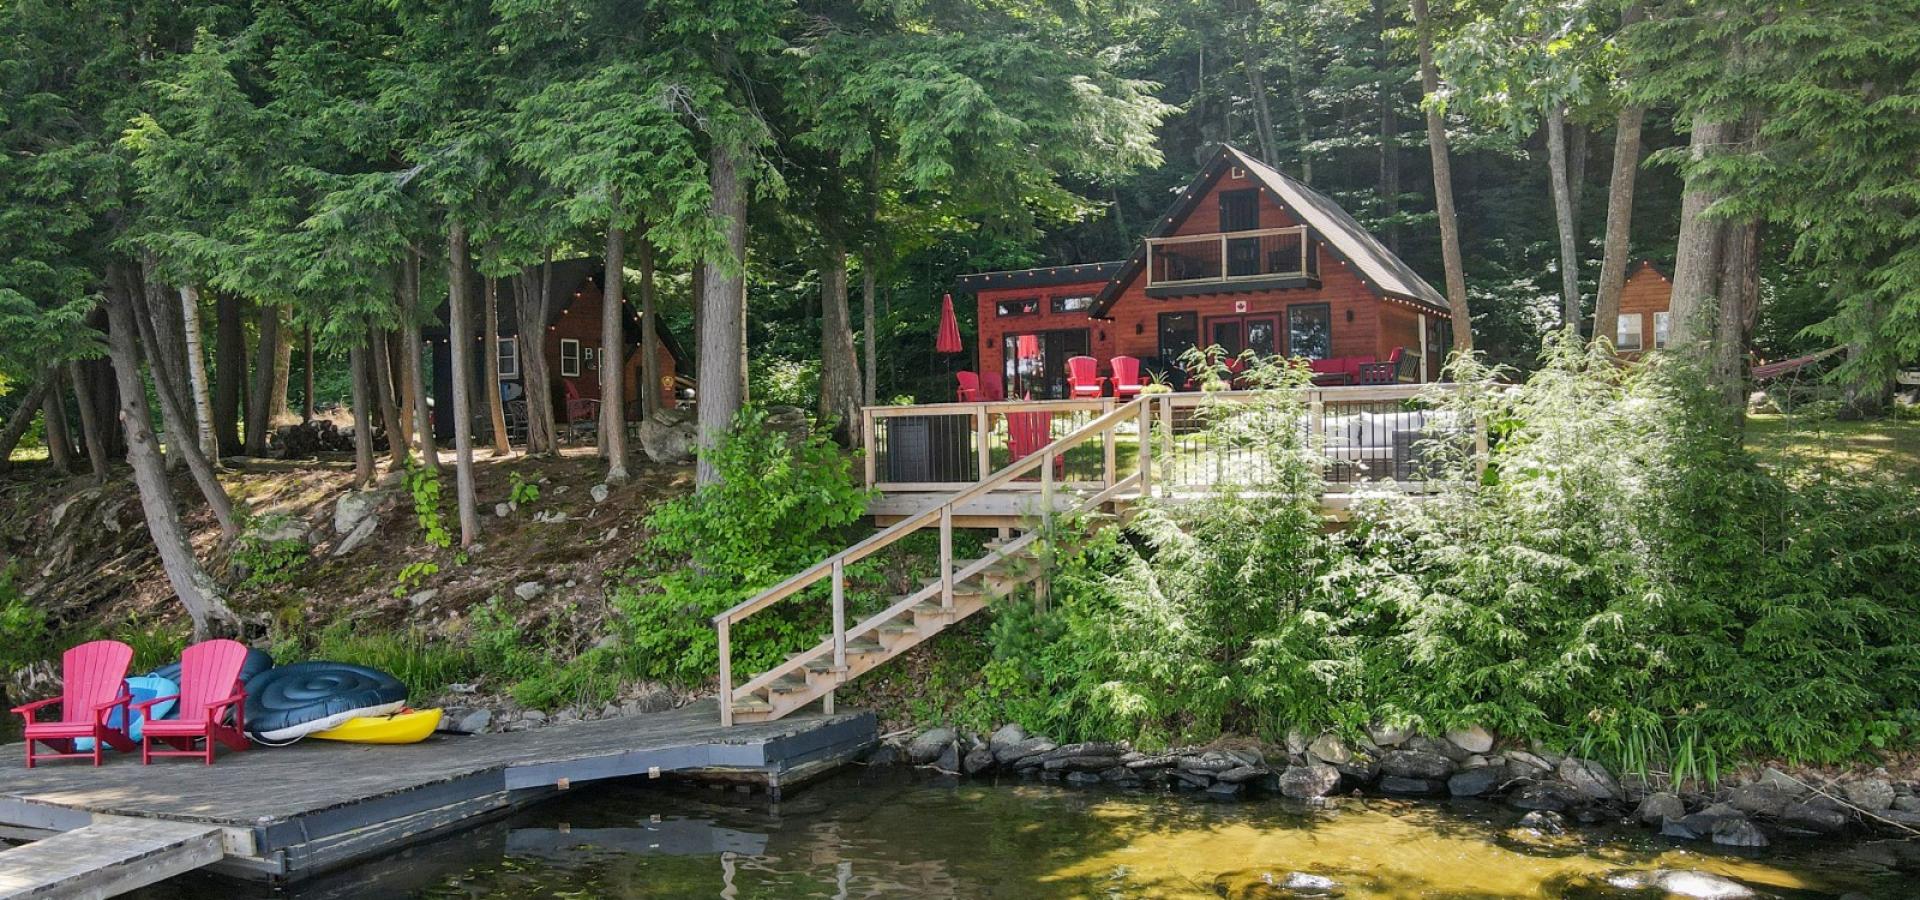 Cottage surrounded by forest, lakeside dec with stairs leading to dock and lakefront.